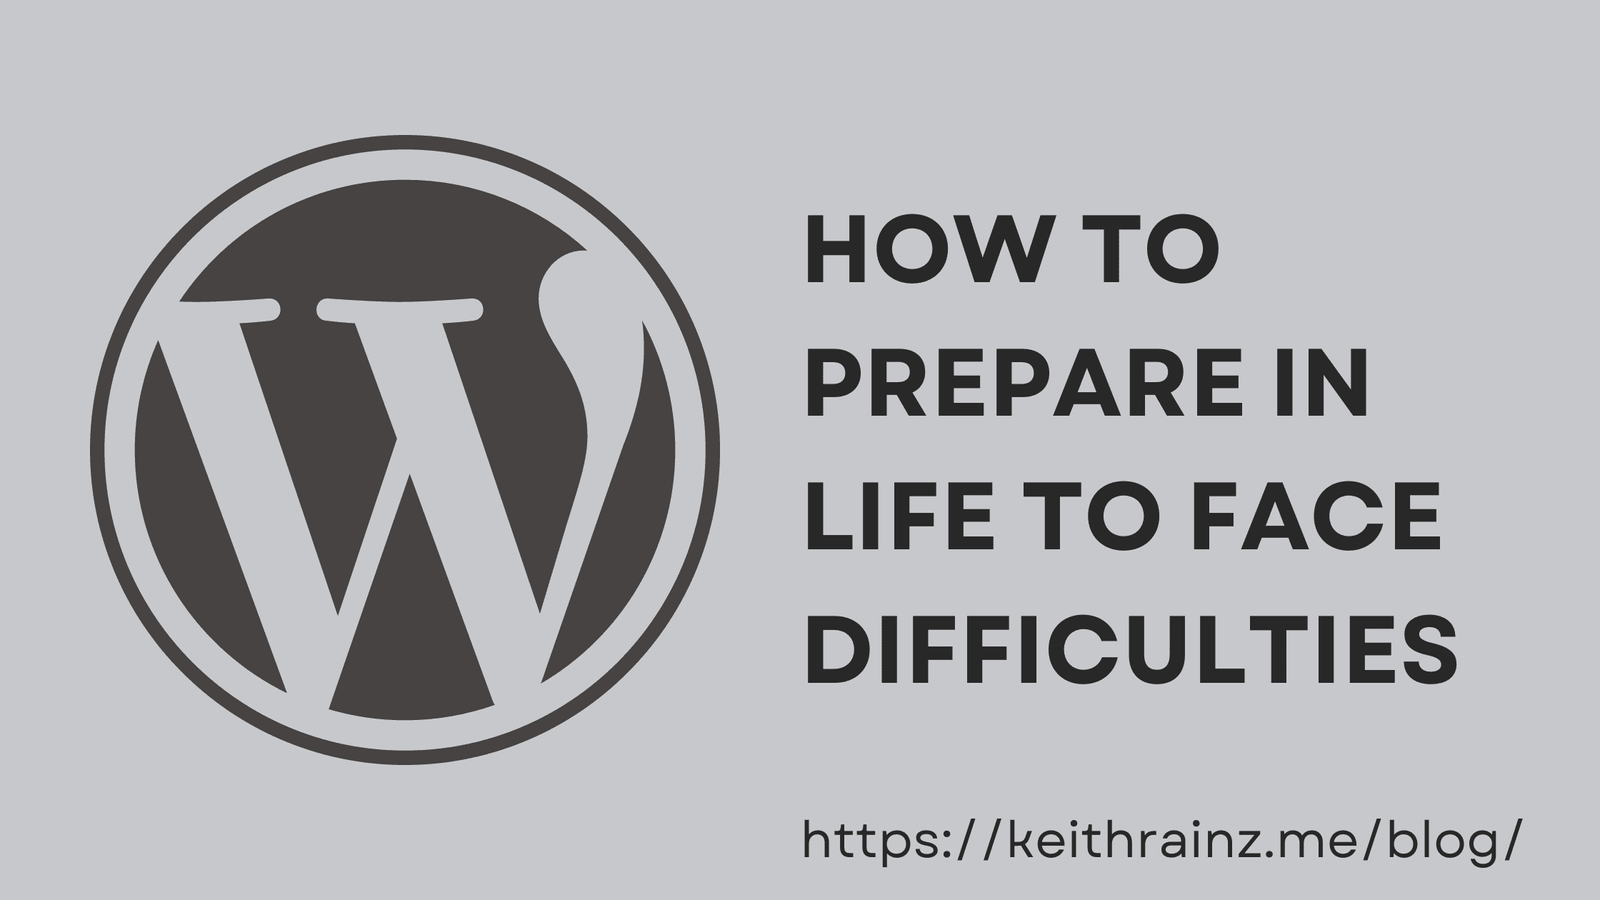 How To Prepare In Life To Face Difficulties